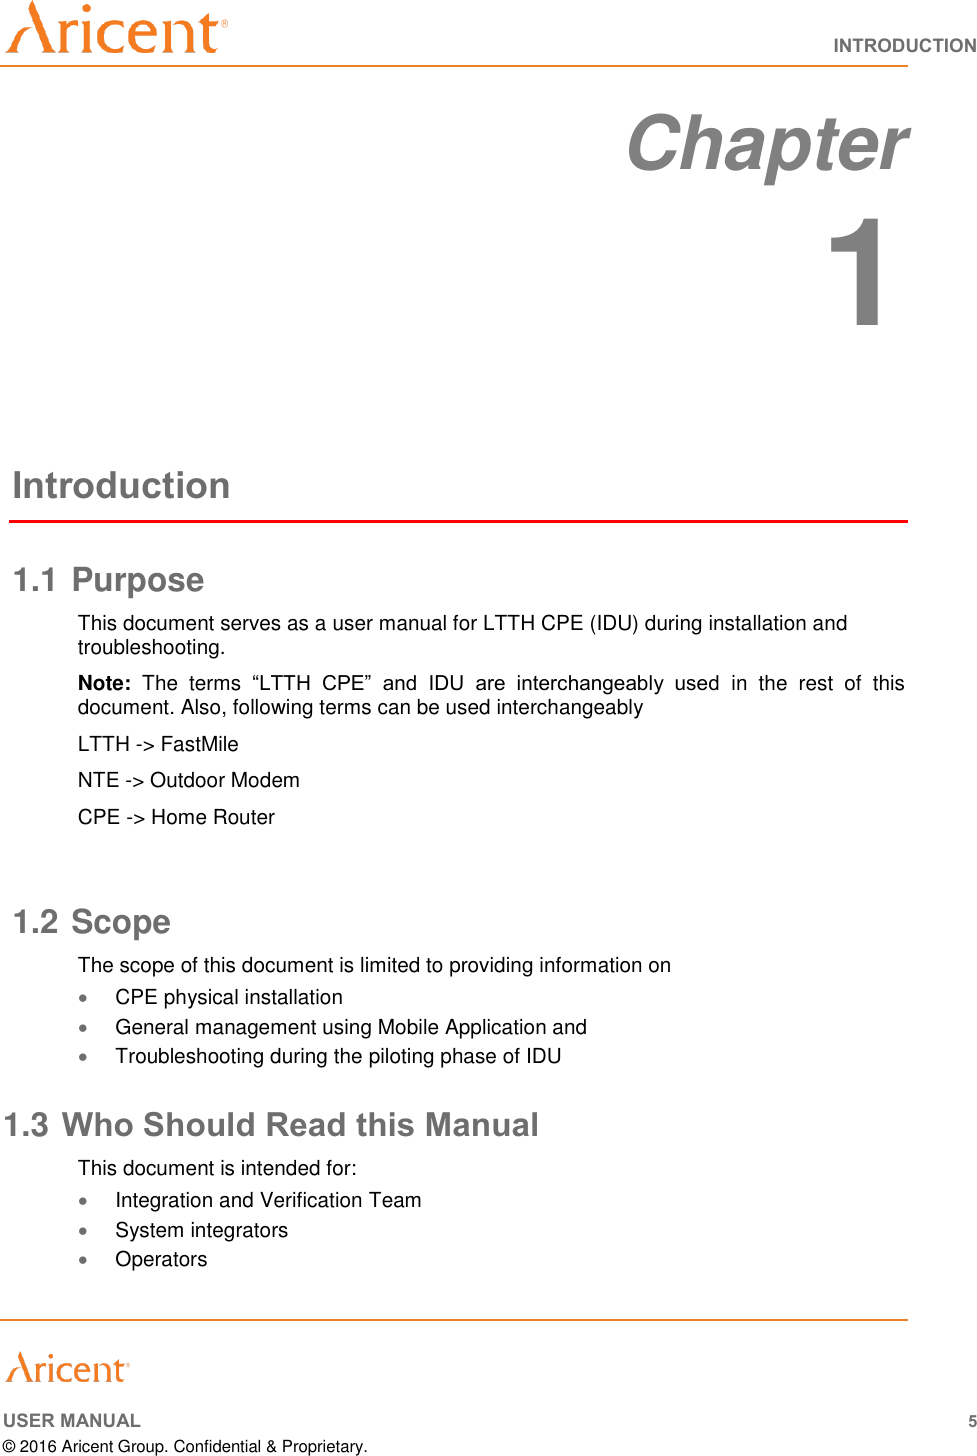   INTRODUCTION     USER MANUAL 5 © 2016 Aricent Group. Confidential &amp; Proprietary.   Chapter  1 Introduction 1.1 Purpose This document serves as a user manual for LTTH CPE (IDU) during installation and troubleshooting.  Note:  The  terms  “LTTH  CPE”  and  IDU  are  interchangeably  used  in  the  rest  of  this document. Also, following terms can be used interchangeably LTTH -&gt; FastMile NTE -&gt; Outdoor Modem CPE -&gt; Home Router  1.2 Scope The scope of this document is limited to providing information on   CPE physical installation  General management using Mobile Application and   Troubleshooting during the piloting phase of IDU 1.3 Who Should Read this Manual This document is intended for:  Integration and Verification Team   System integrators  Operators 